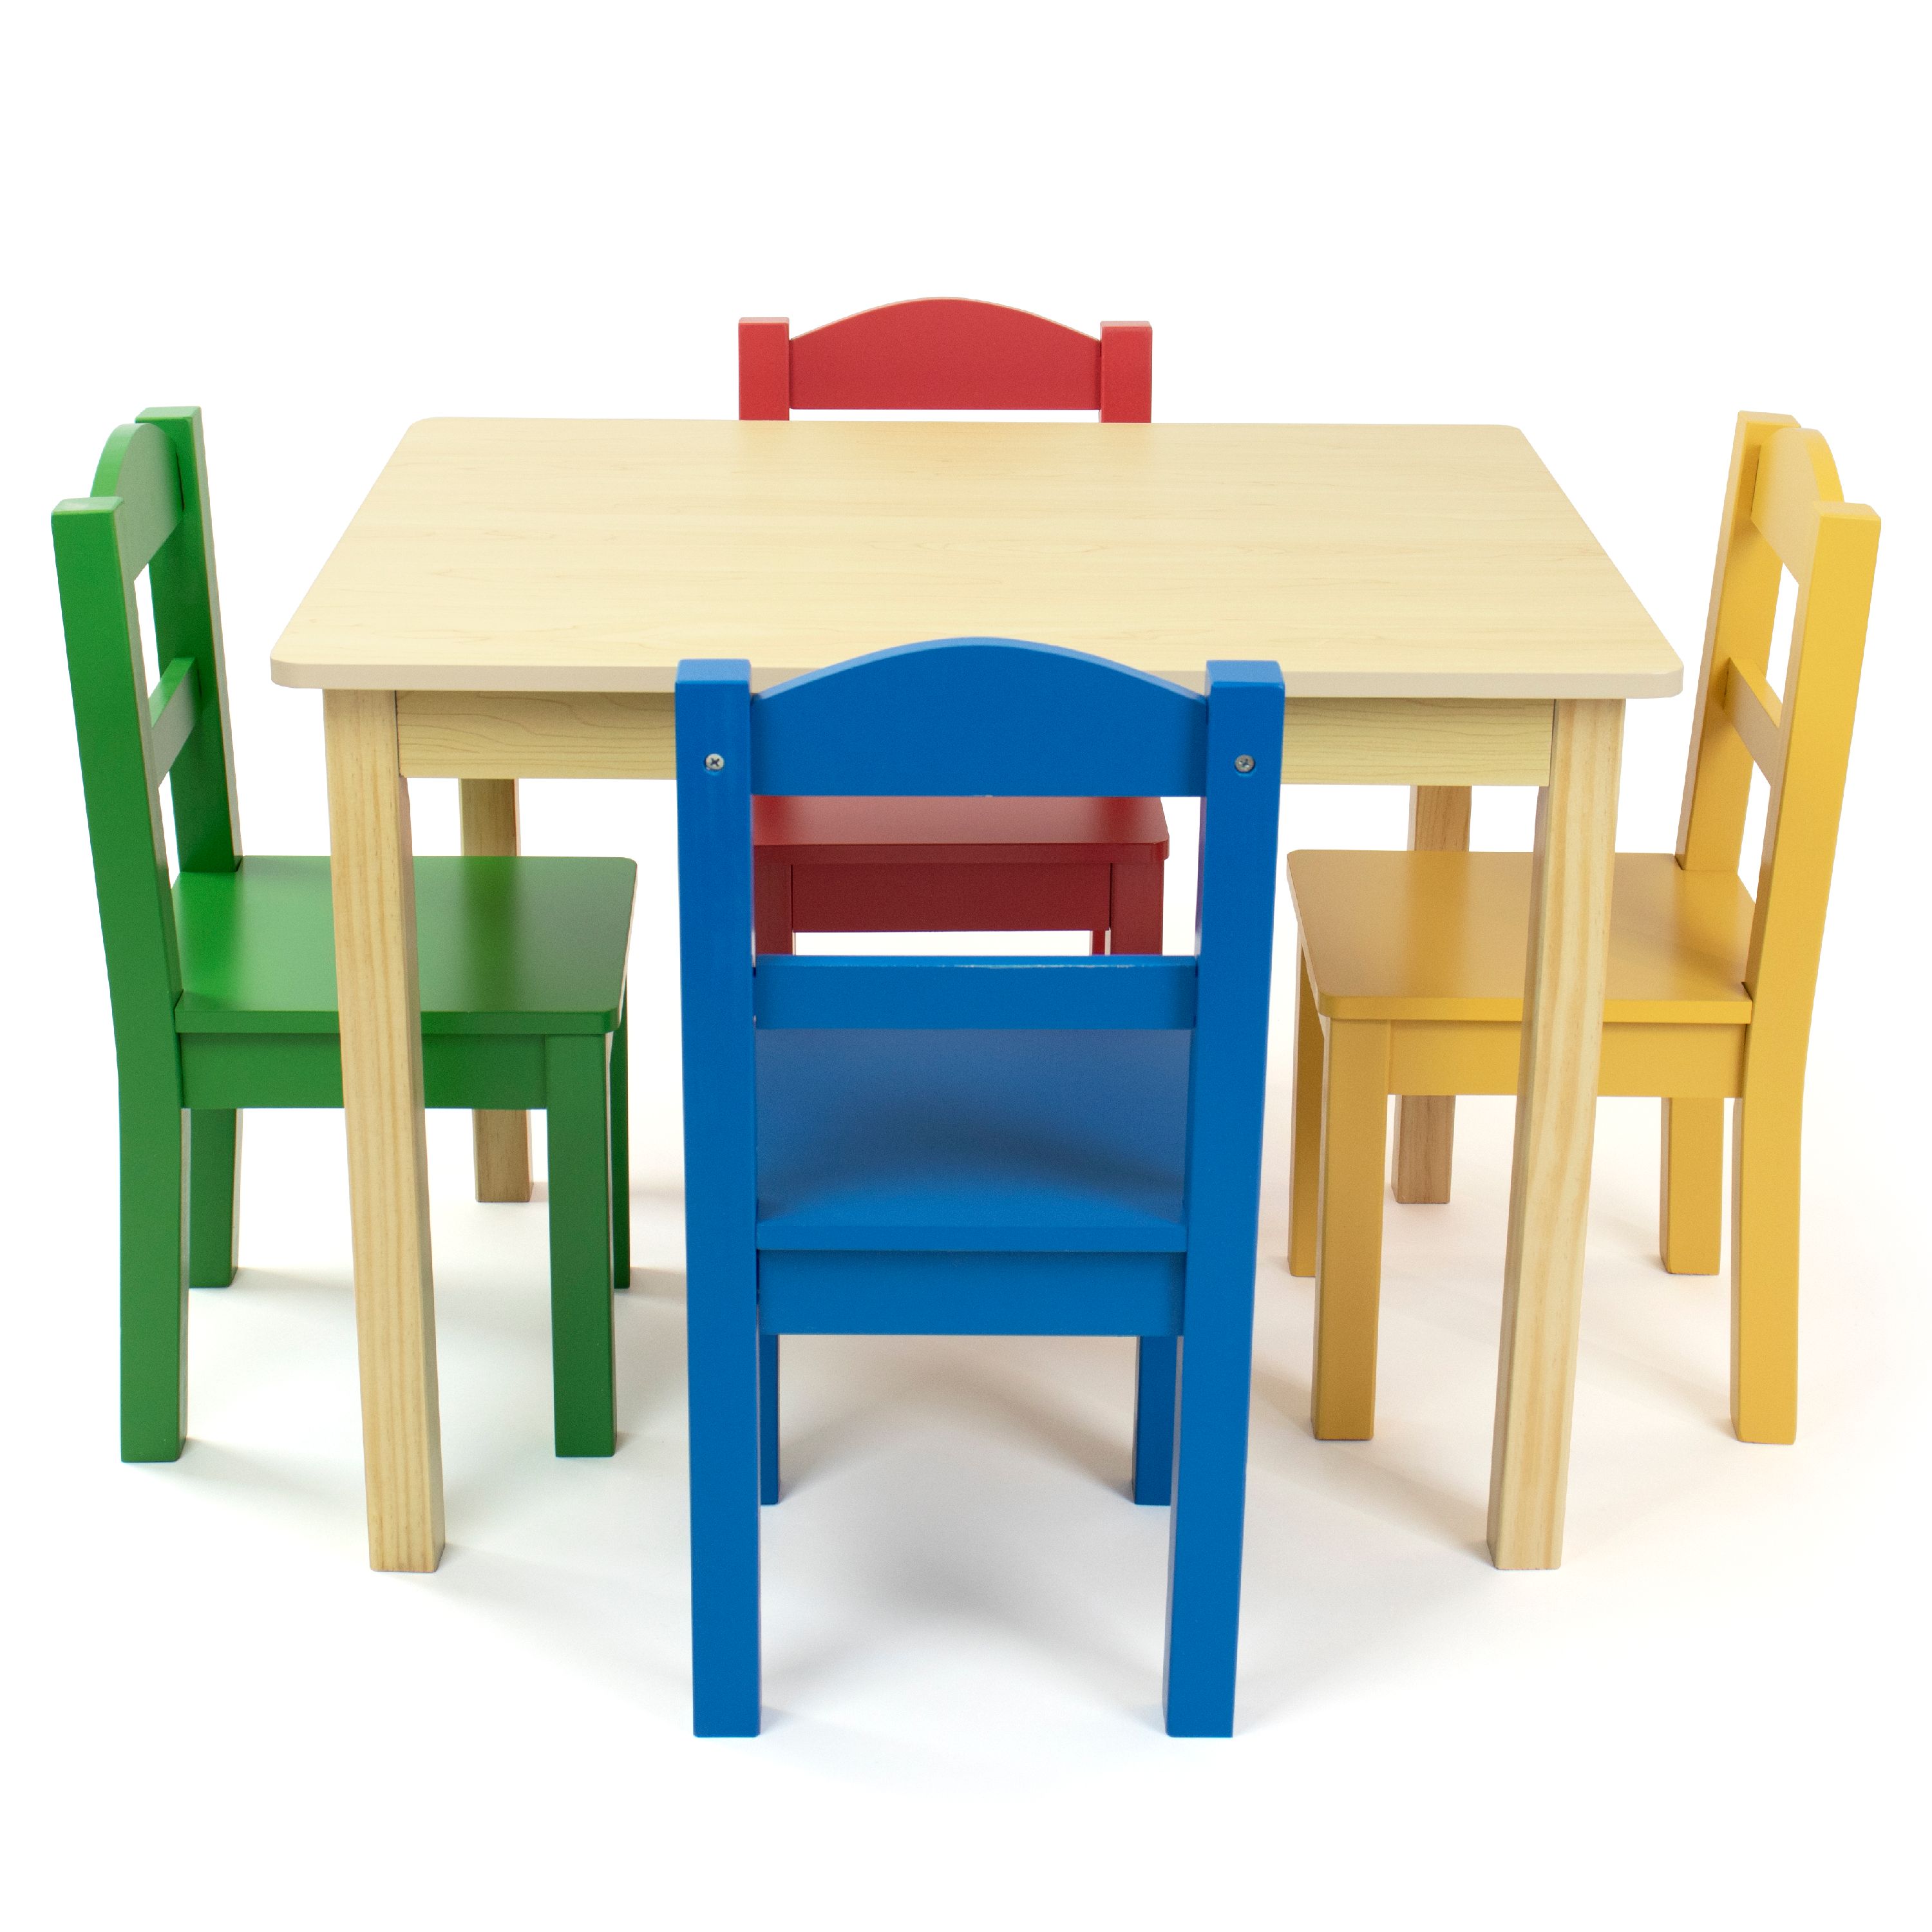 Humble Crew Primary Kids Wood Table and 4 Chairs Set, Natural Wood/Primary, for kids ages 3+ - image 1 of 5